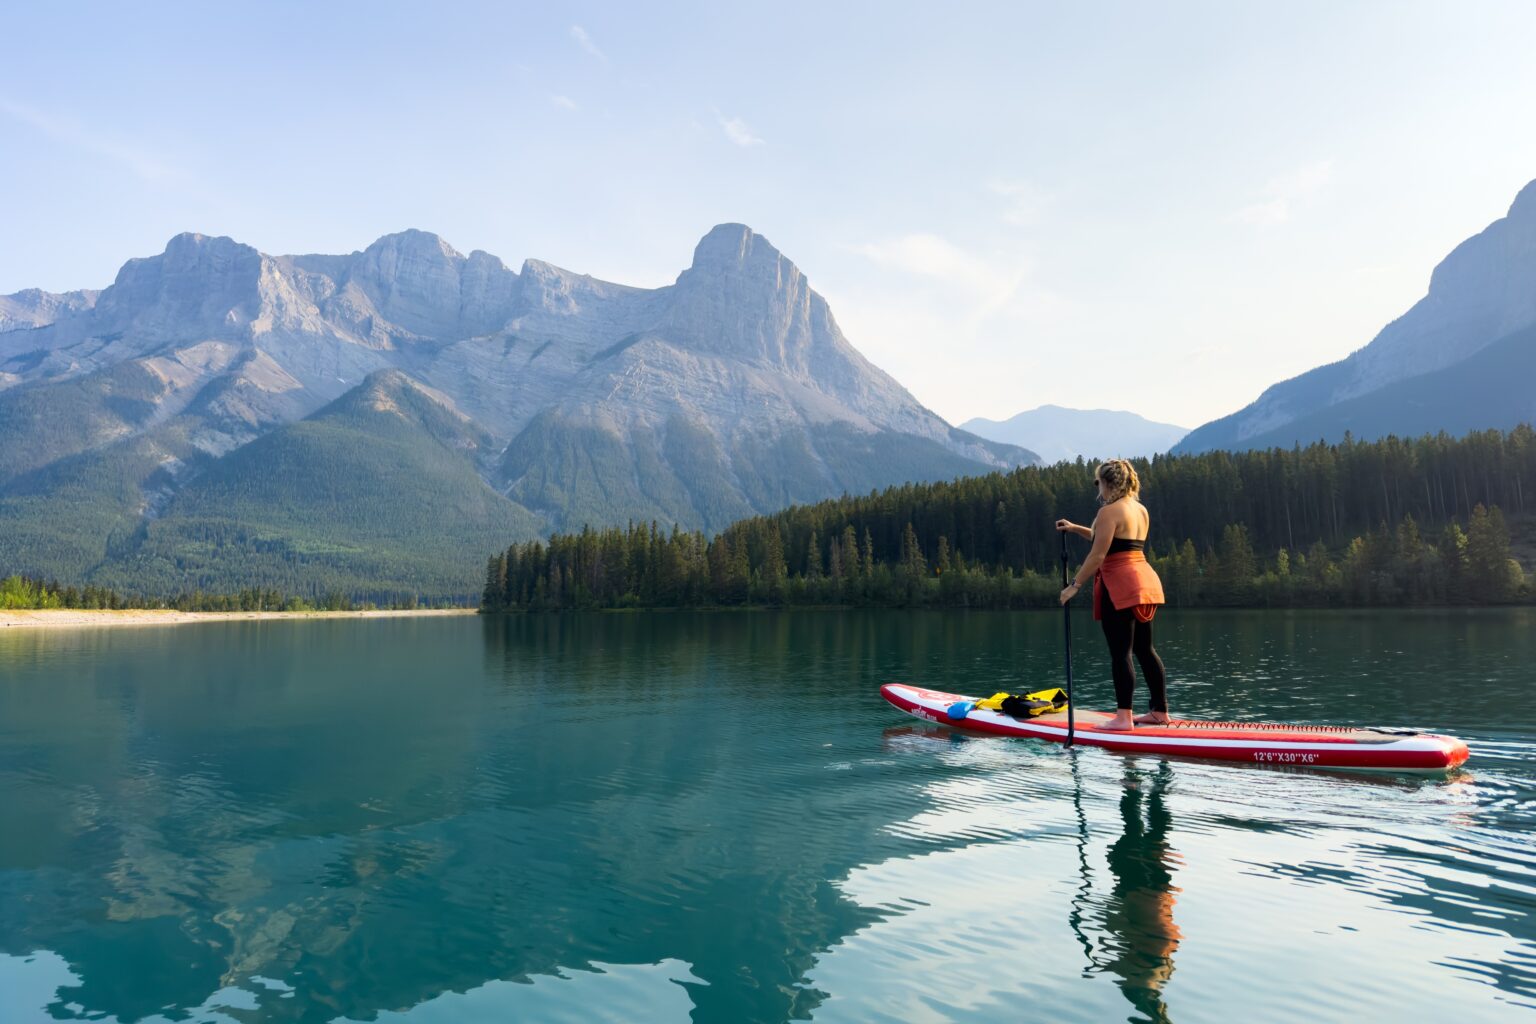 The Banff Blog - Your Guide To Canadian Rockies